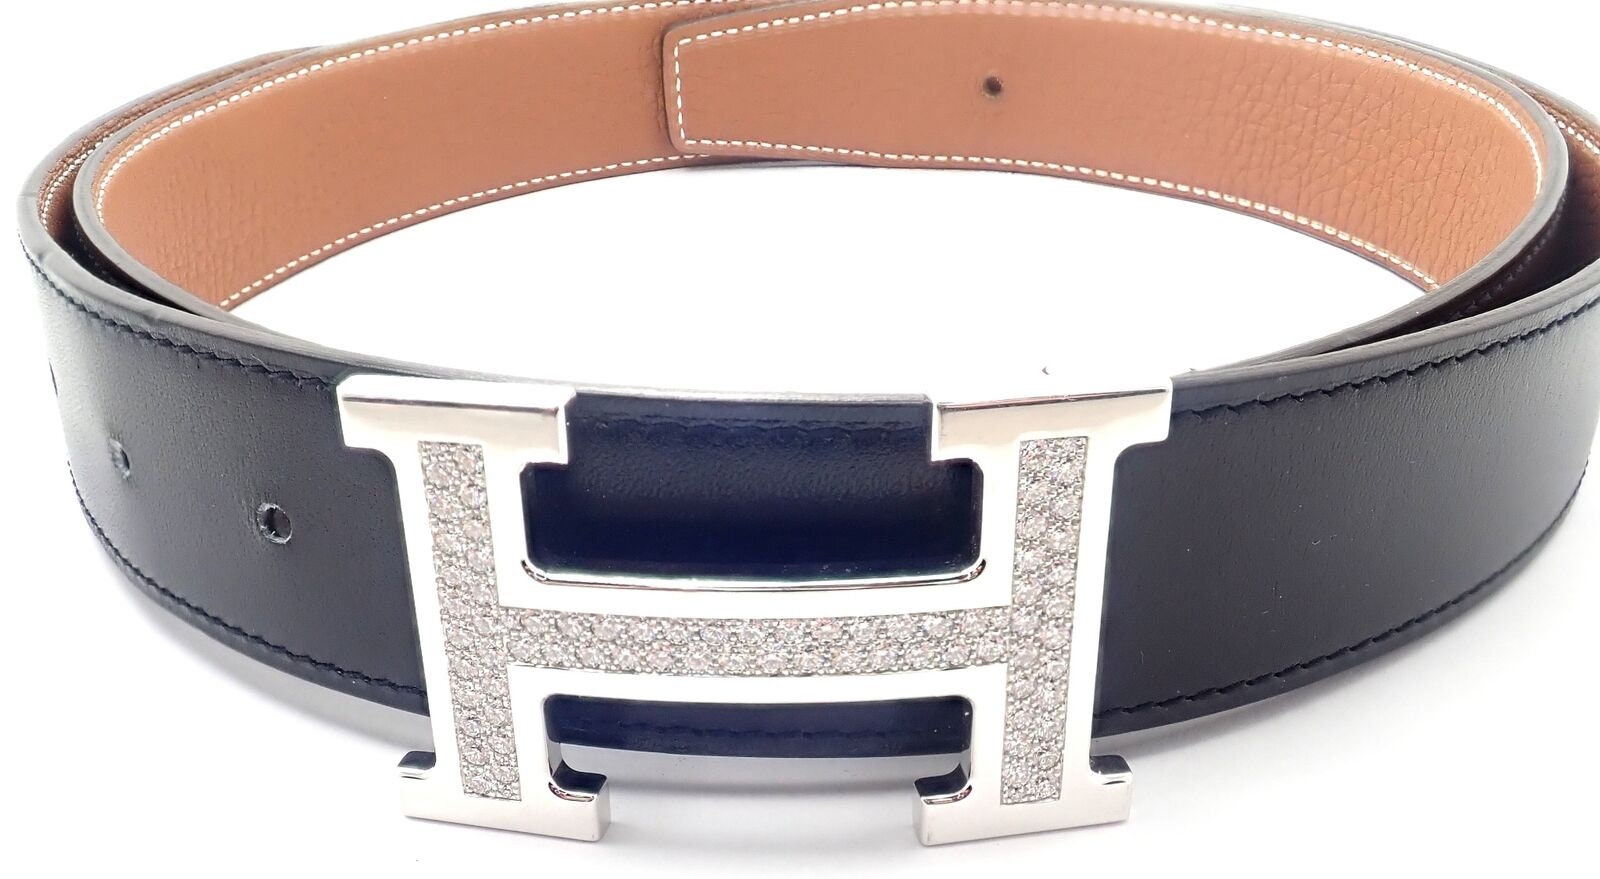 Hermes So Black Box Leather Belt H Constance 32 mm Reversible to Brown 85